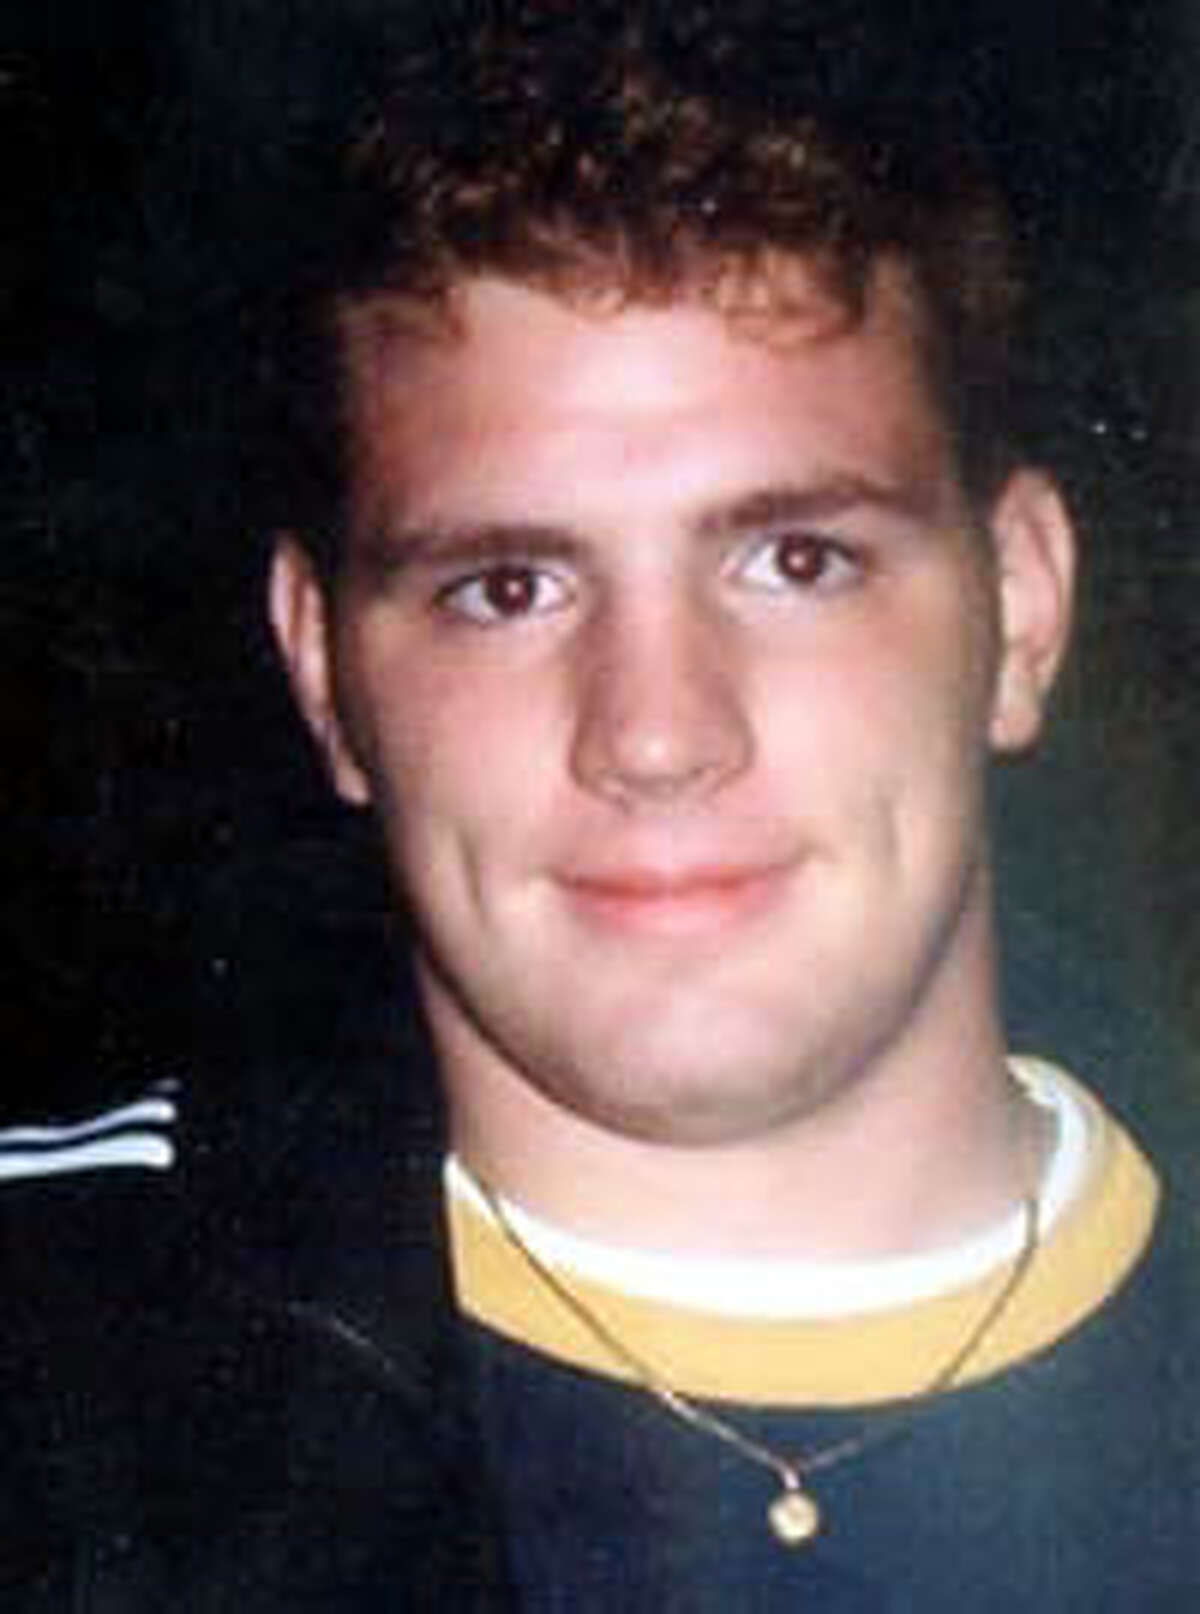 Craig Frear, pictured, disappeared from his Scotia neighborhood on June 27, 2004.